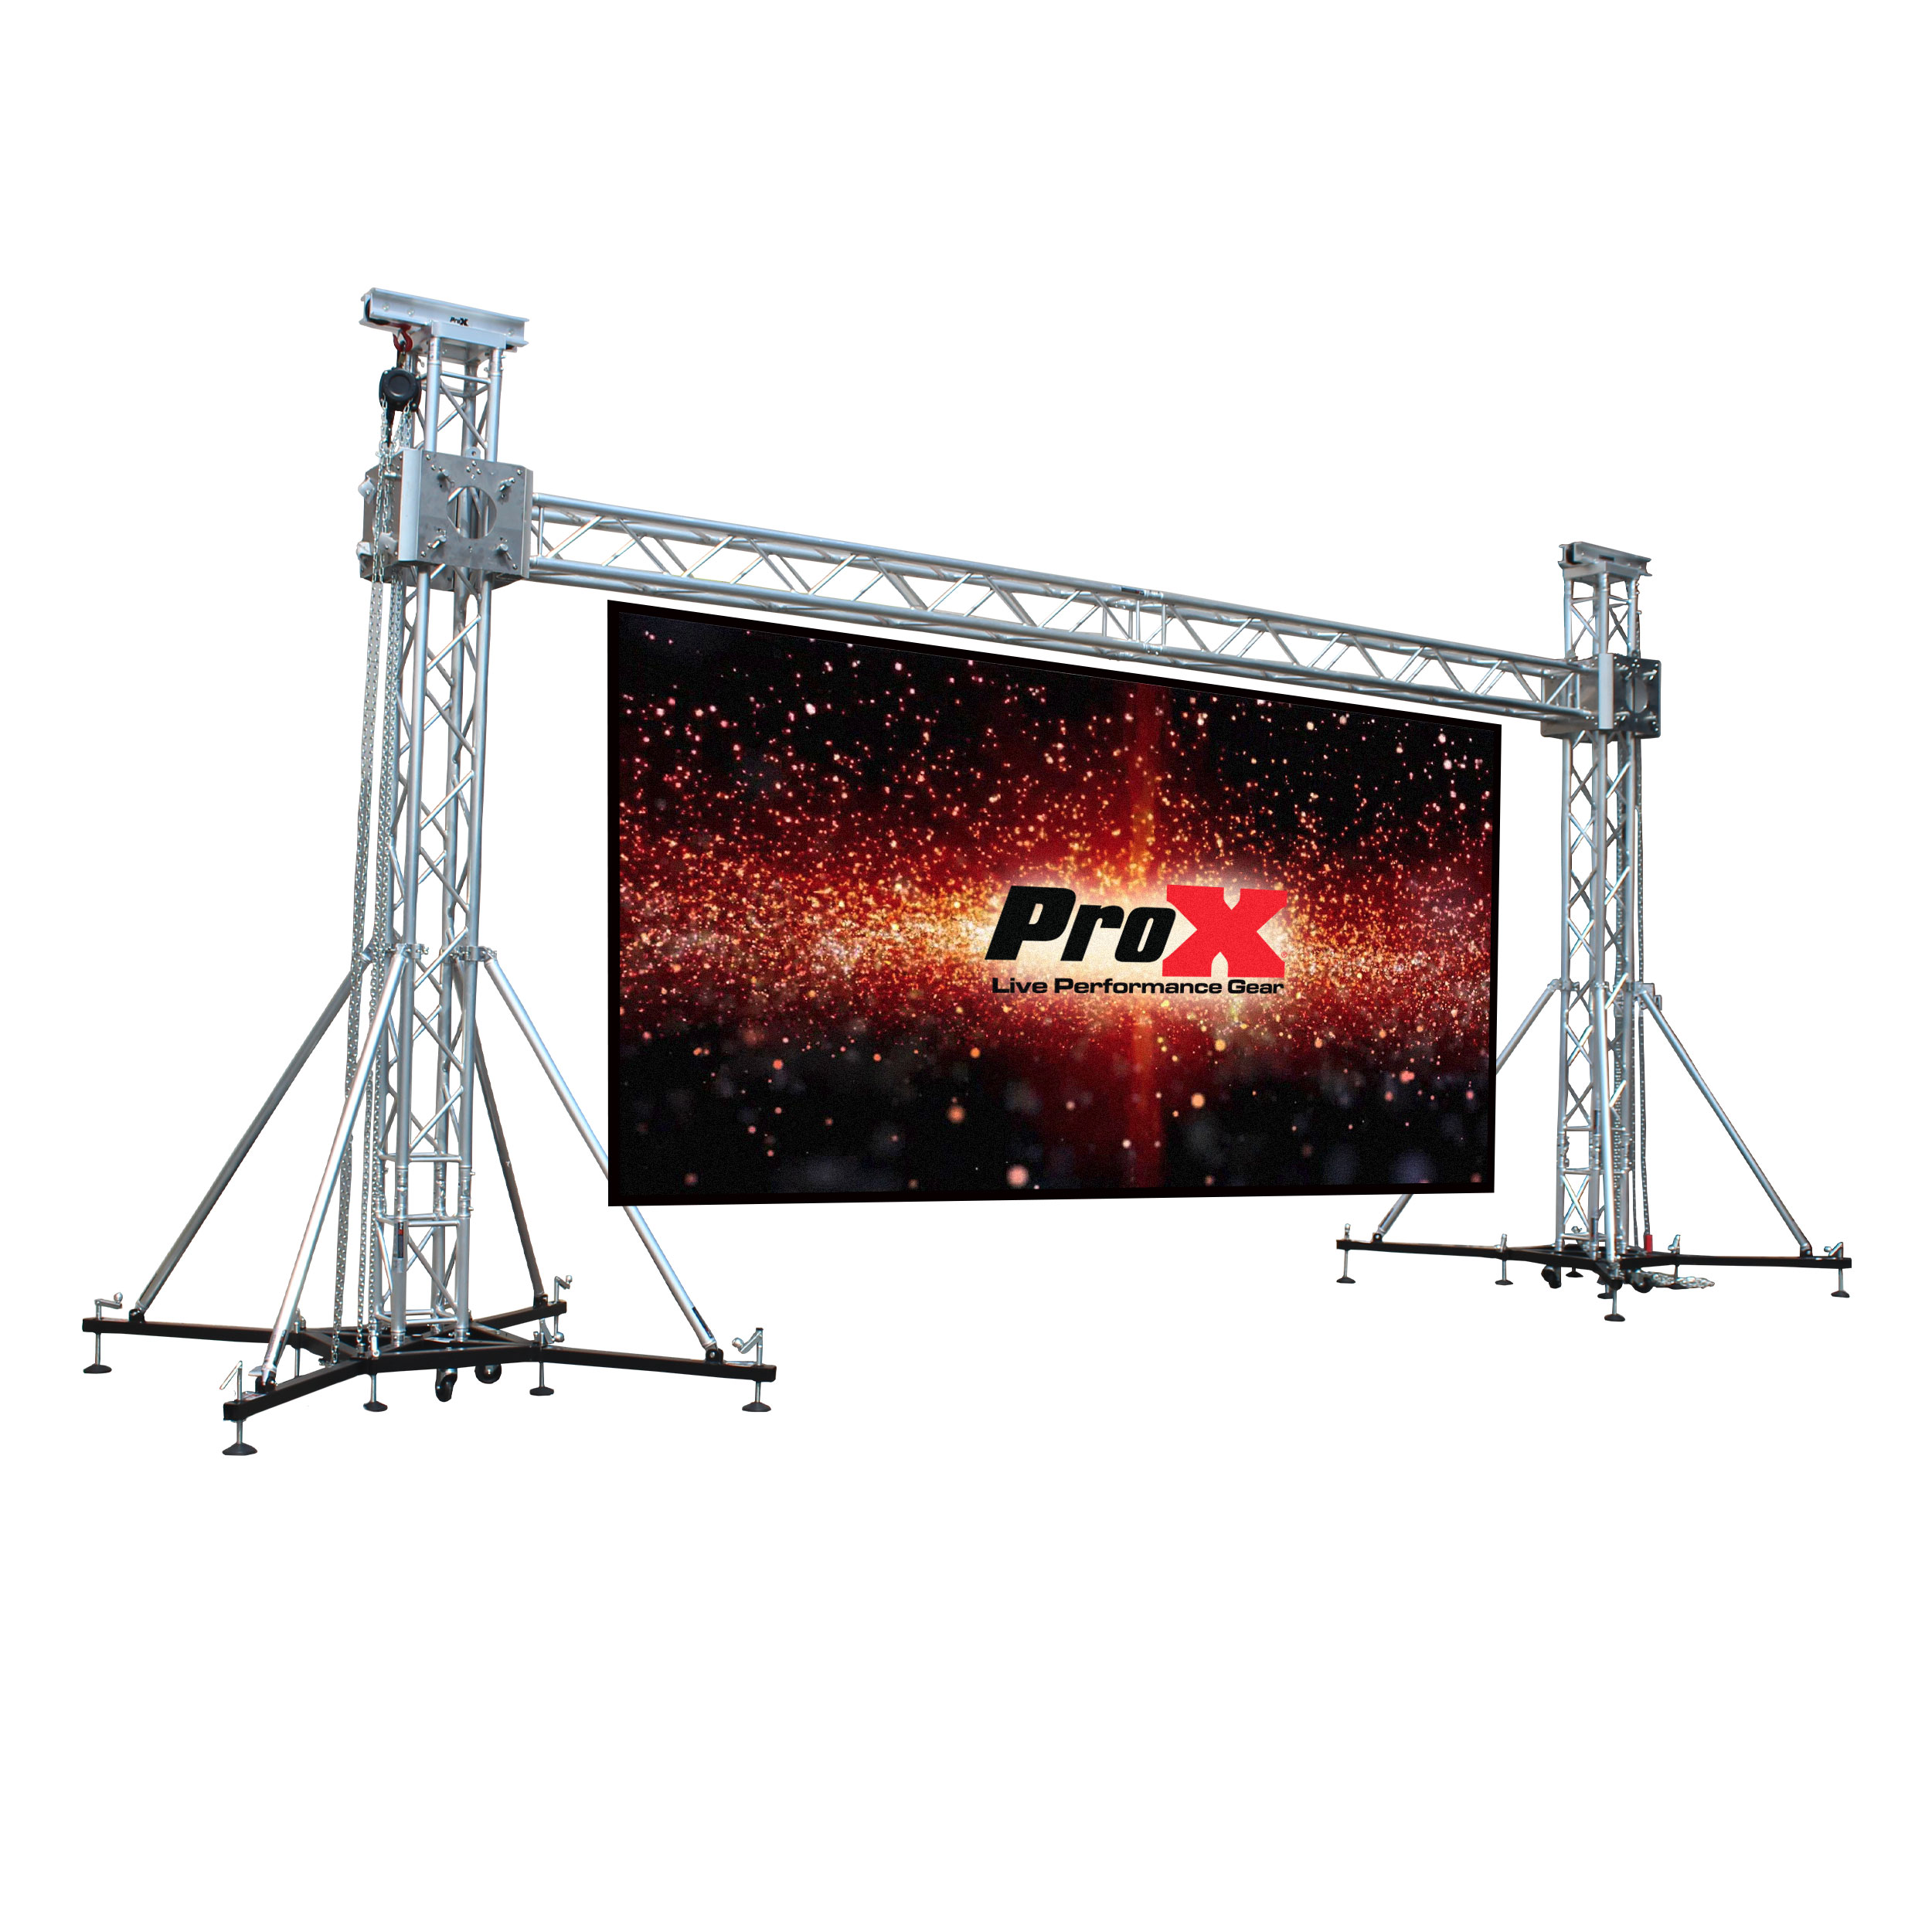 kæmpe stor tofu At deaktivere LED Screen Display Panel Video Fly Wall Truss Ground Support System 20'W x  23'H Outdoor w/ Hoist | ProX Live Performance Gear